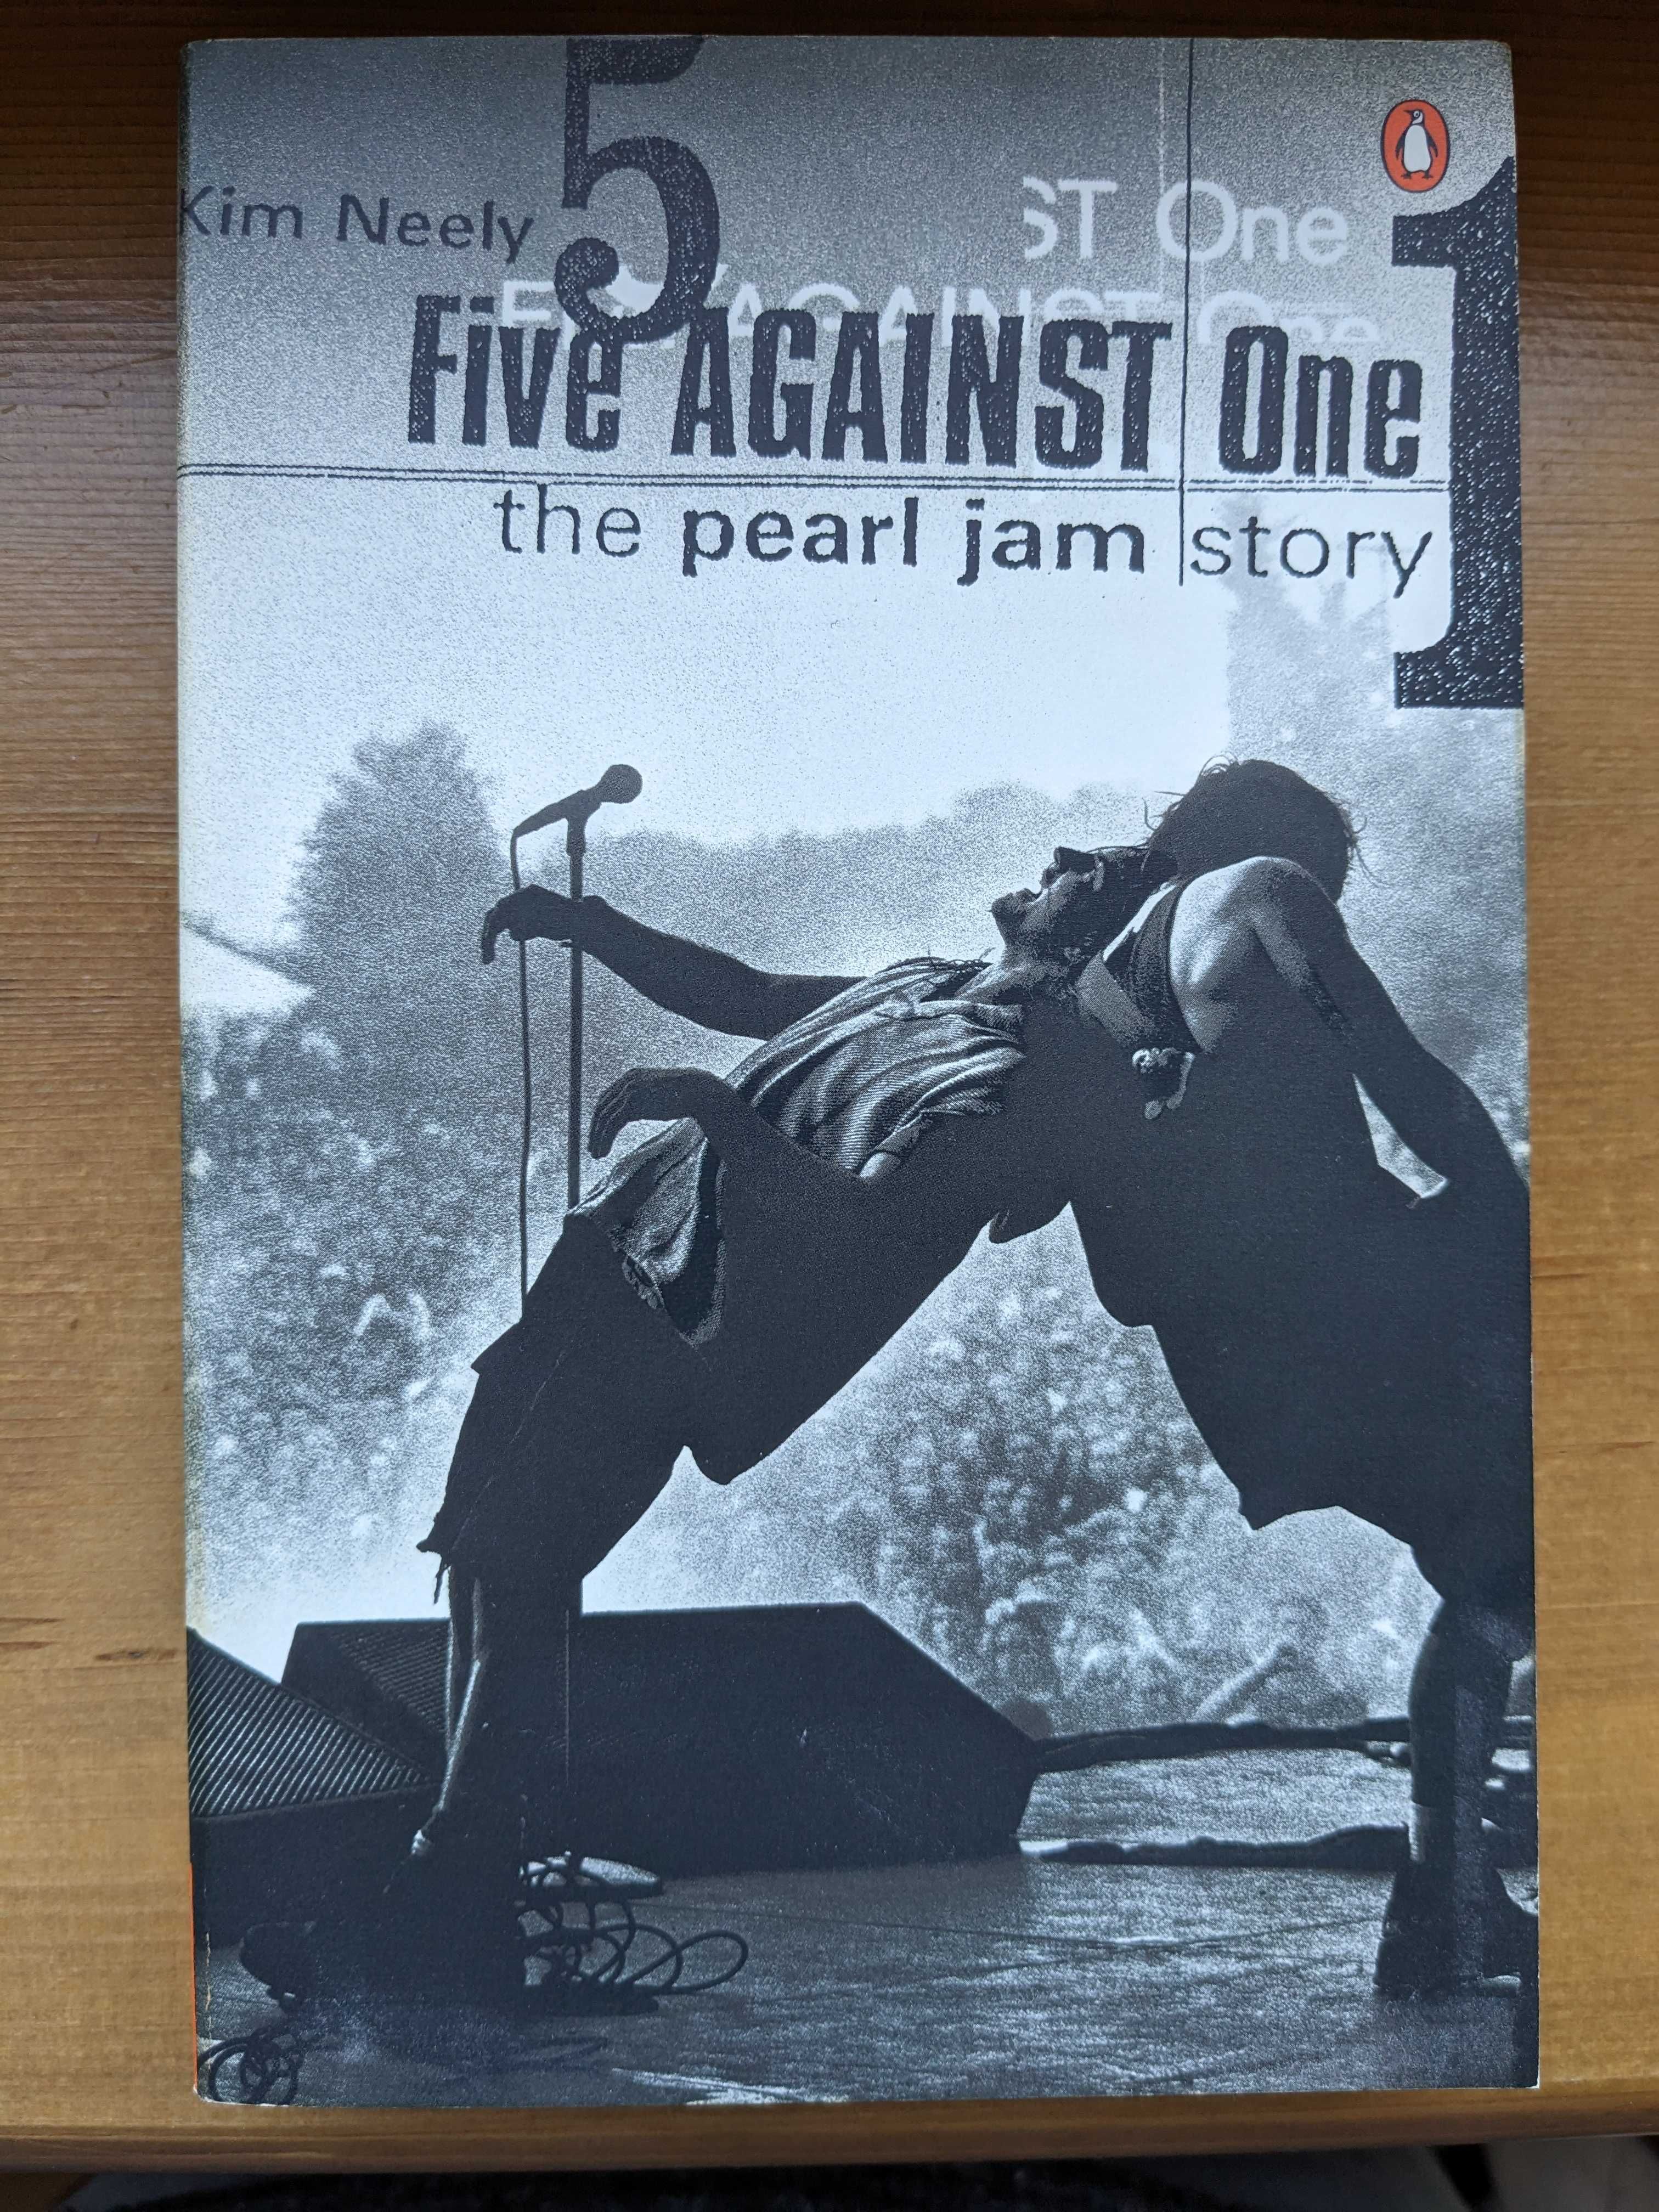 "Five Against One, The Pearl Jam Story", de Kim Neely